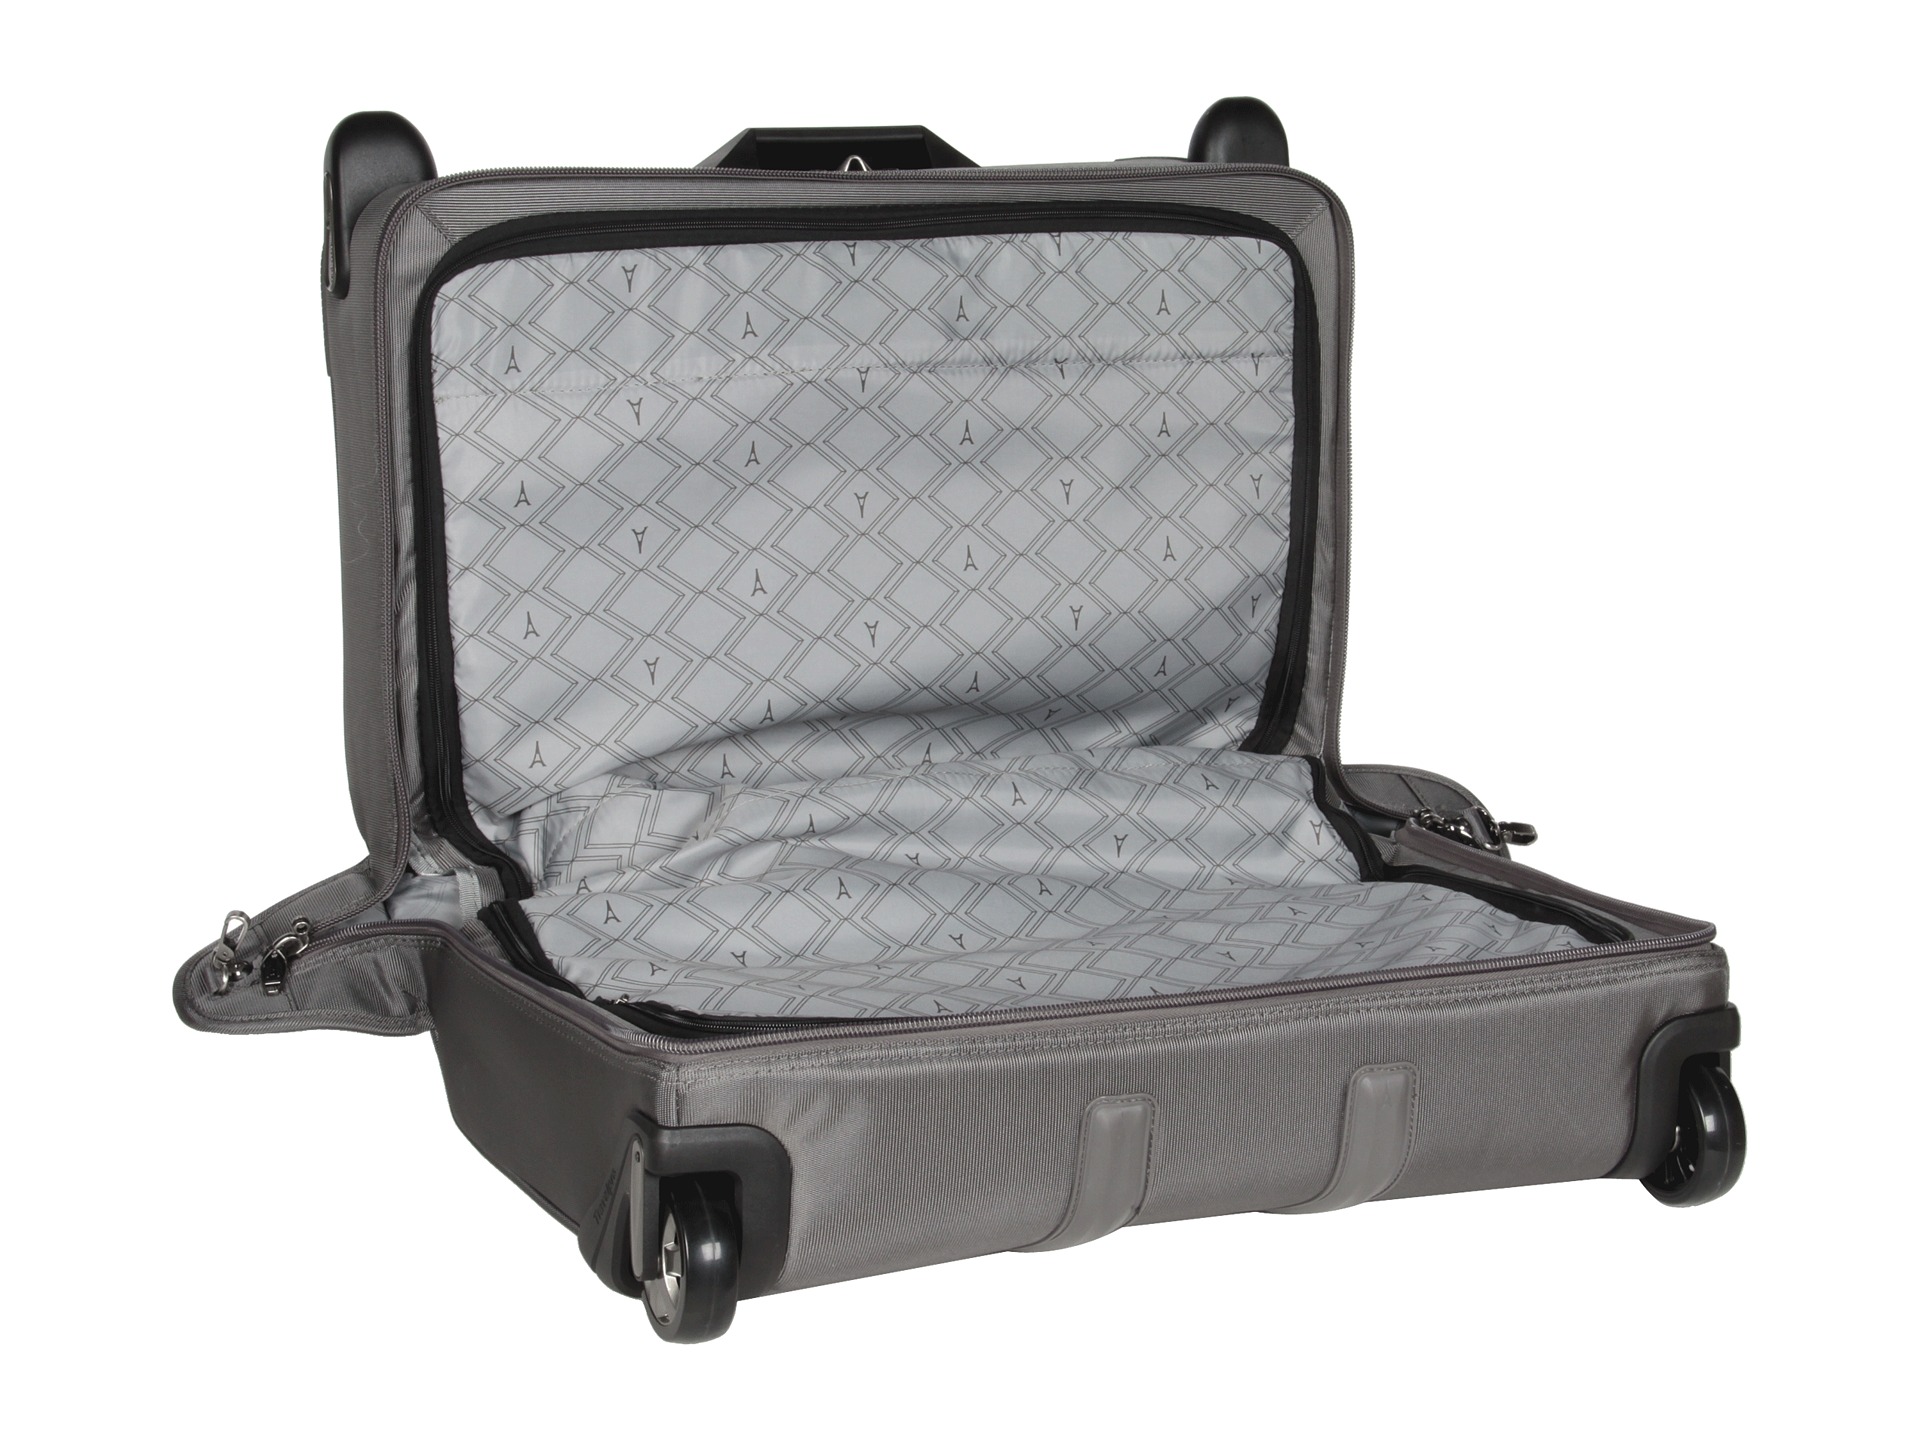 Travelpro Crew 9 Carry On Rolling Garment Bag | Shipped Free at Zappos